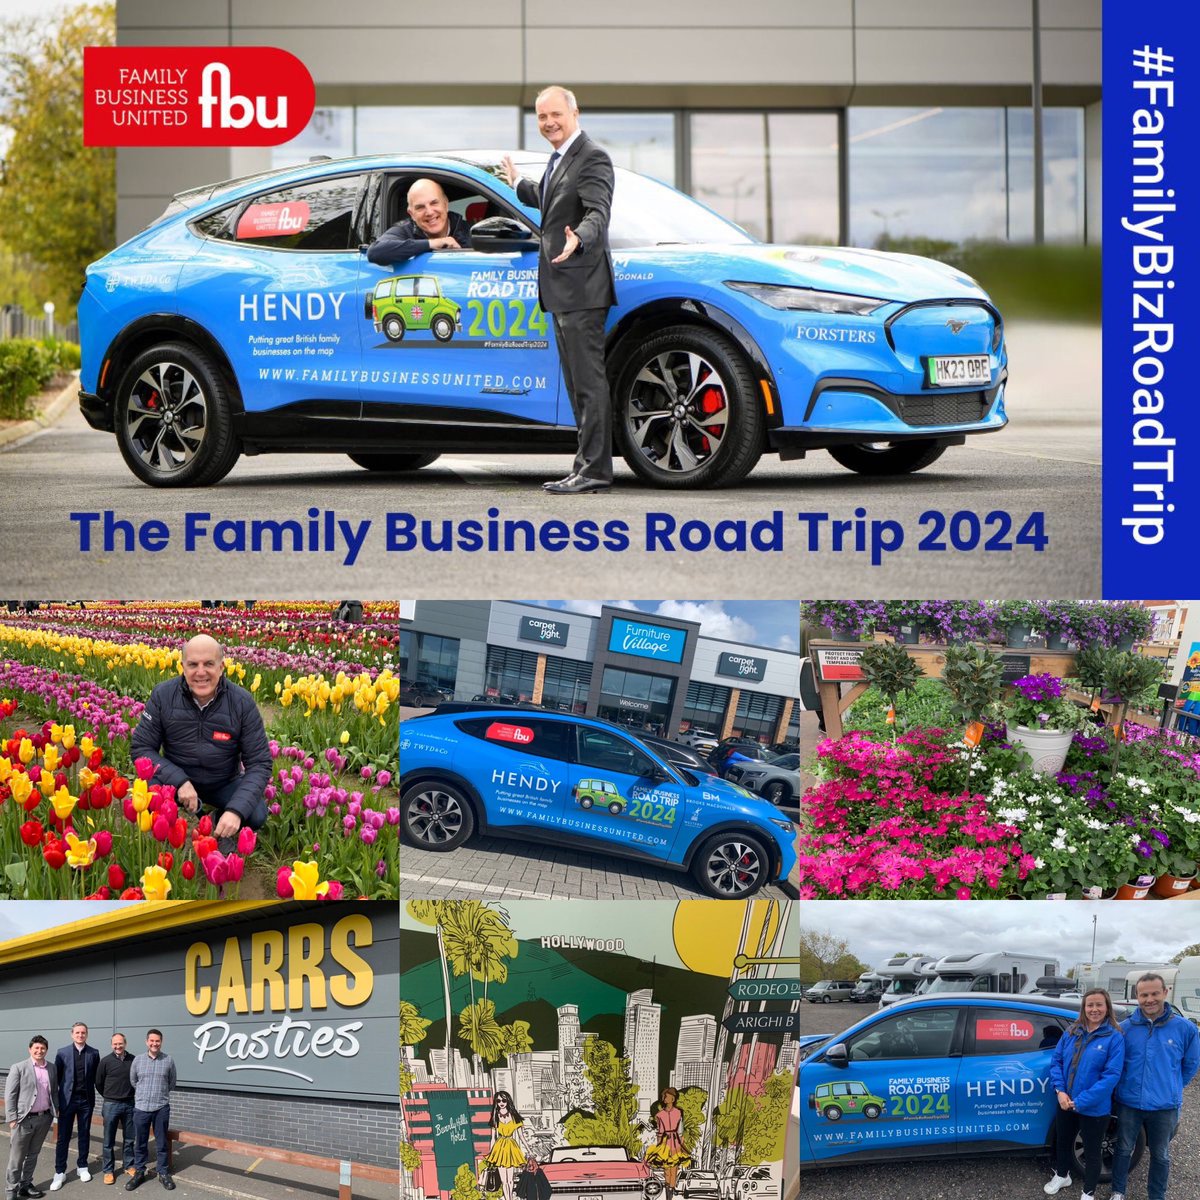 Some of my favourite photos from the 2024 #FamilyBizRoadTrip to date!